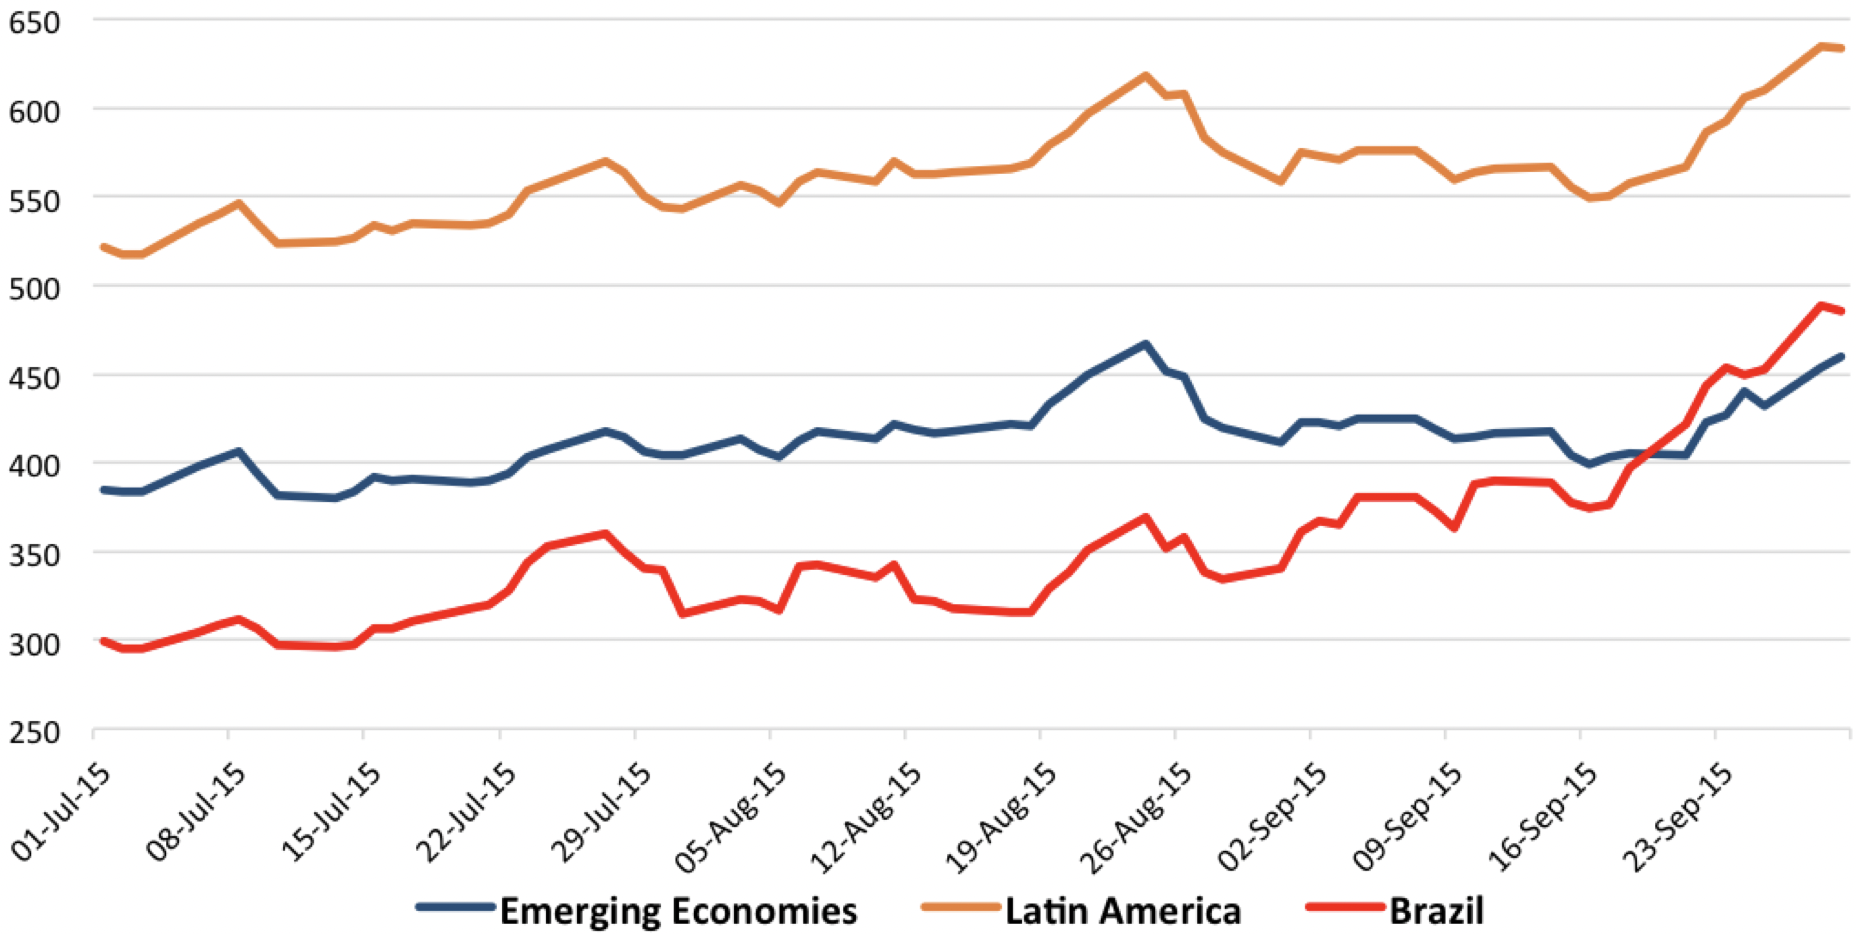 This graph compares sovereign debt spreads for emerging economies, Latin America, and Brazil over time.